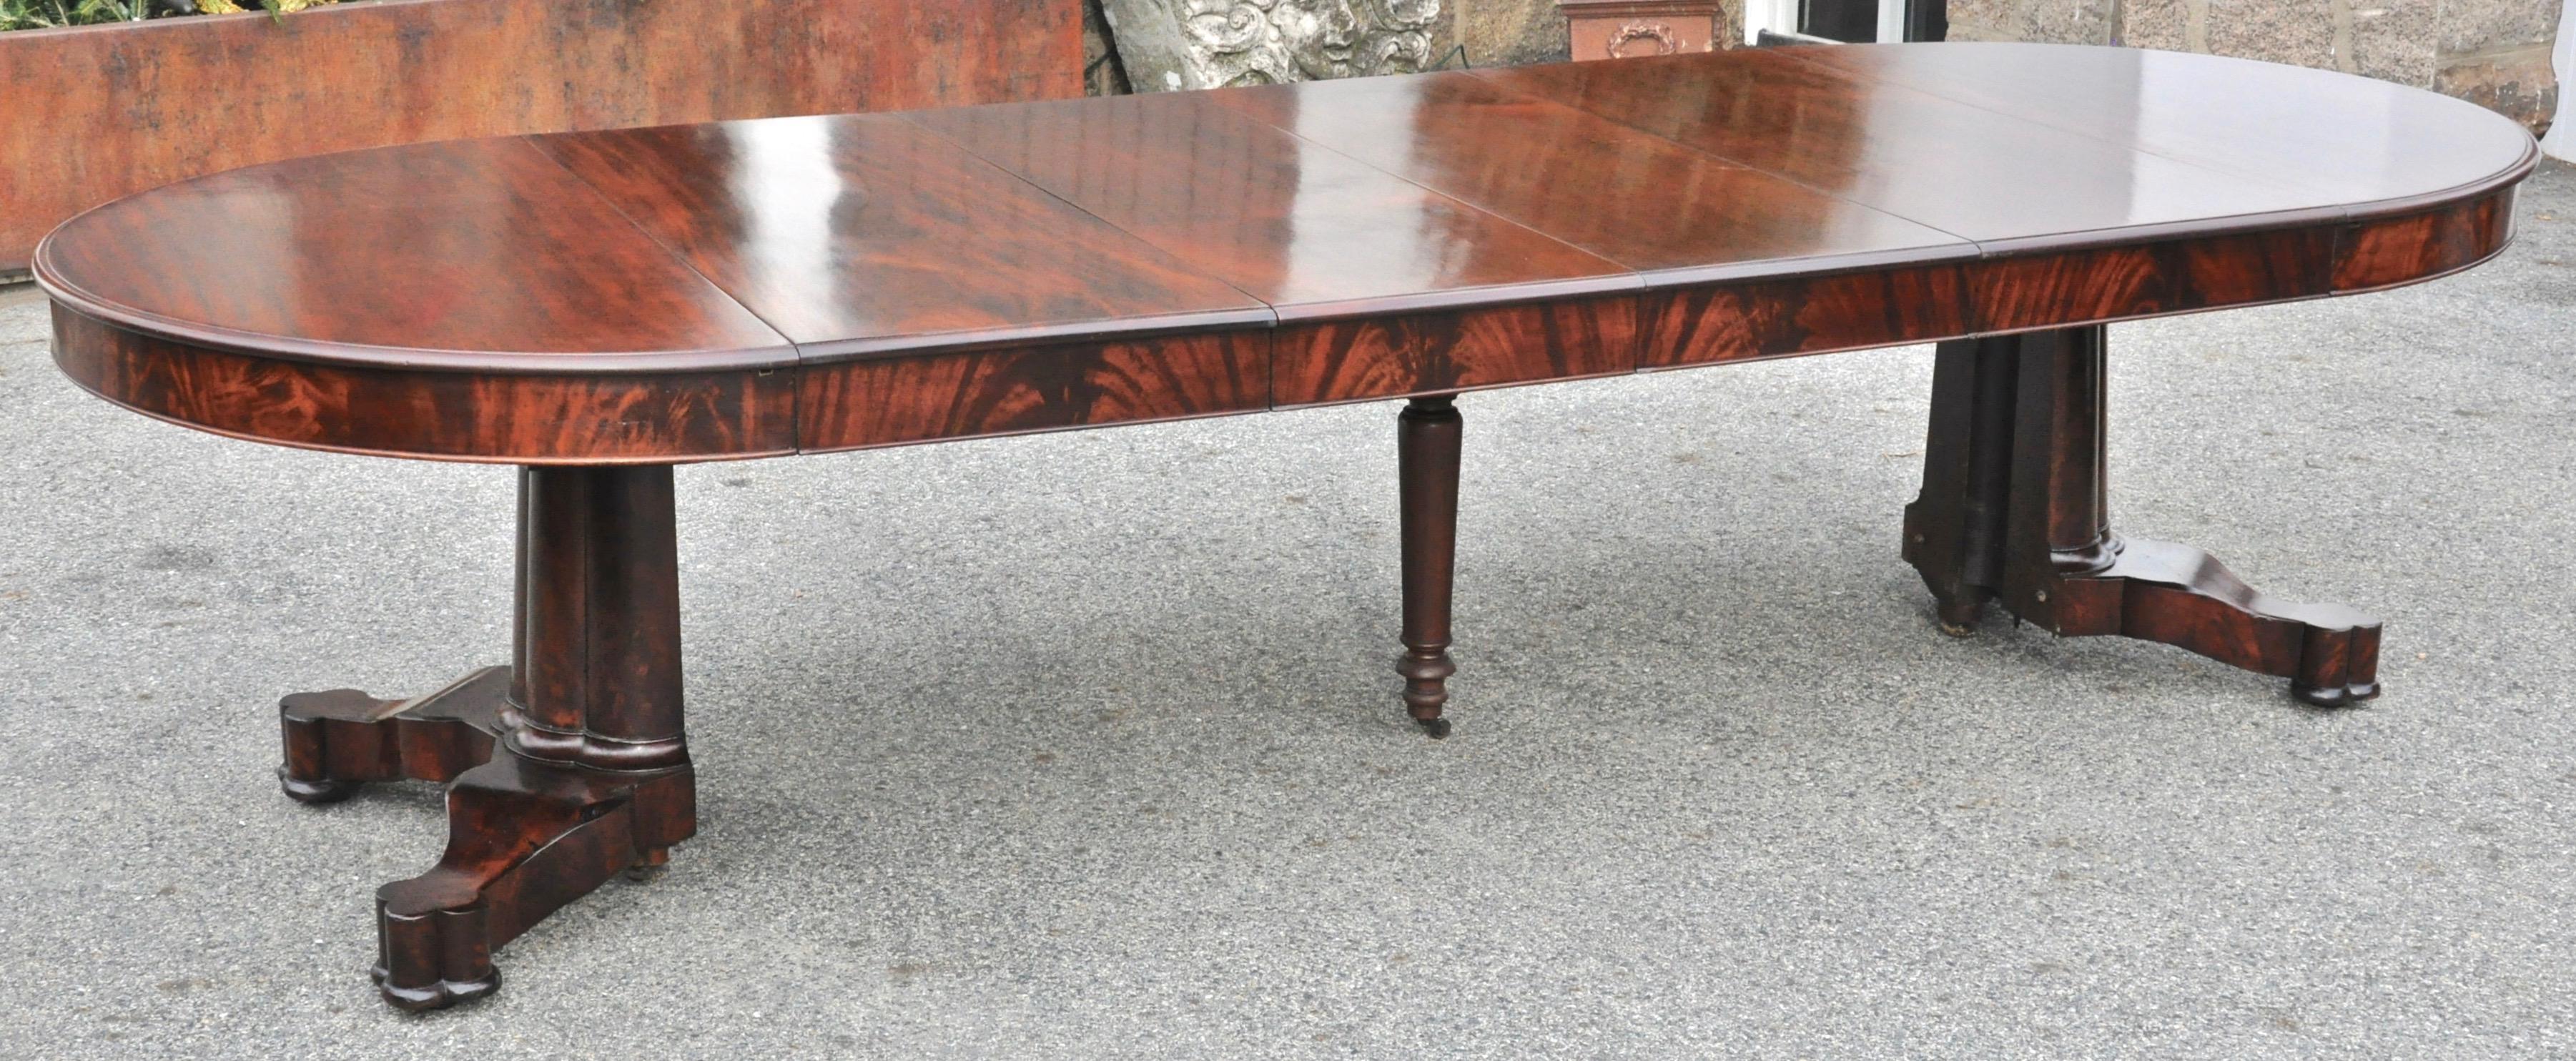 Period American Early 19th Century Round Extension Dining Table by Charles Hobe 1